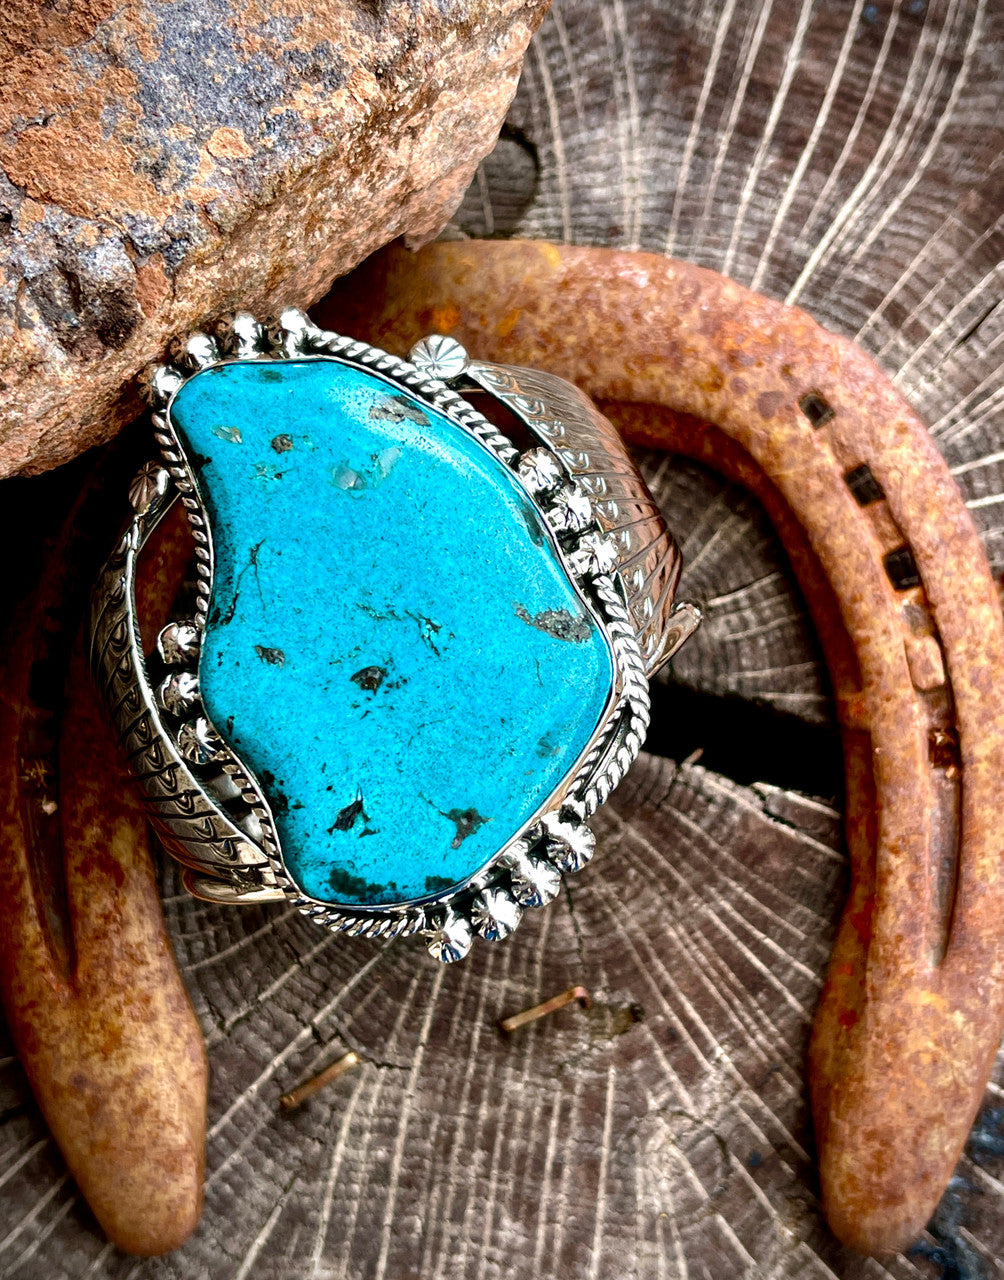 Huge, Nevada Turquoise Stone Created by Navajo Artist Clarence Long